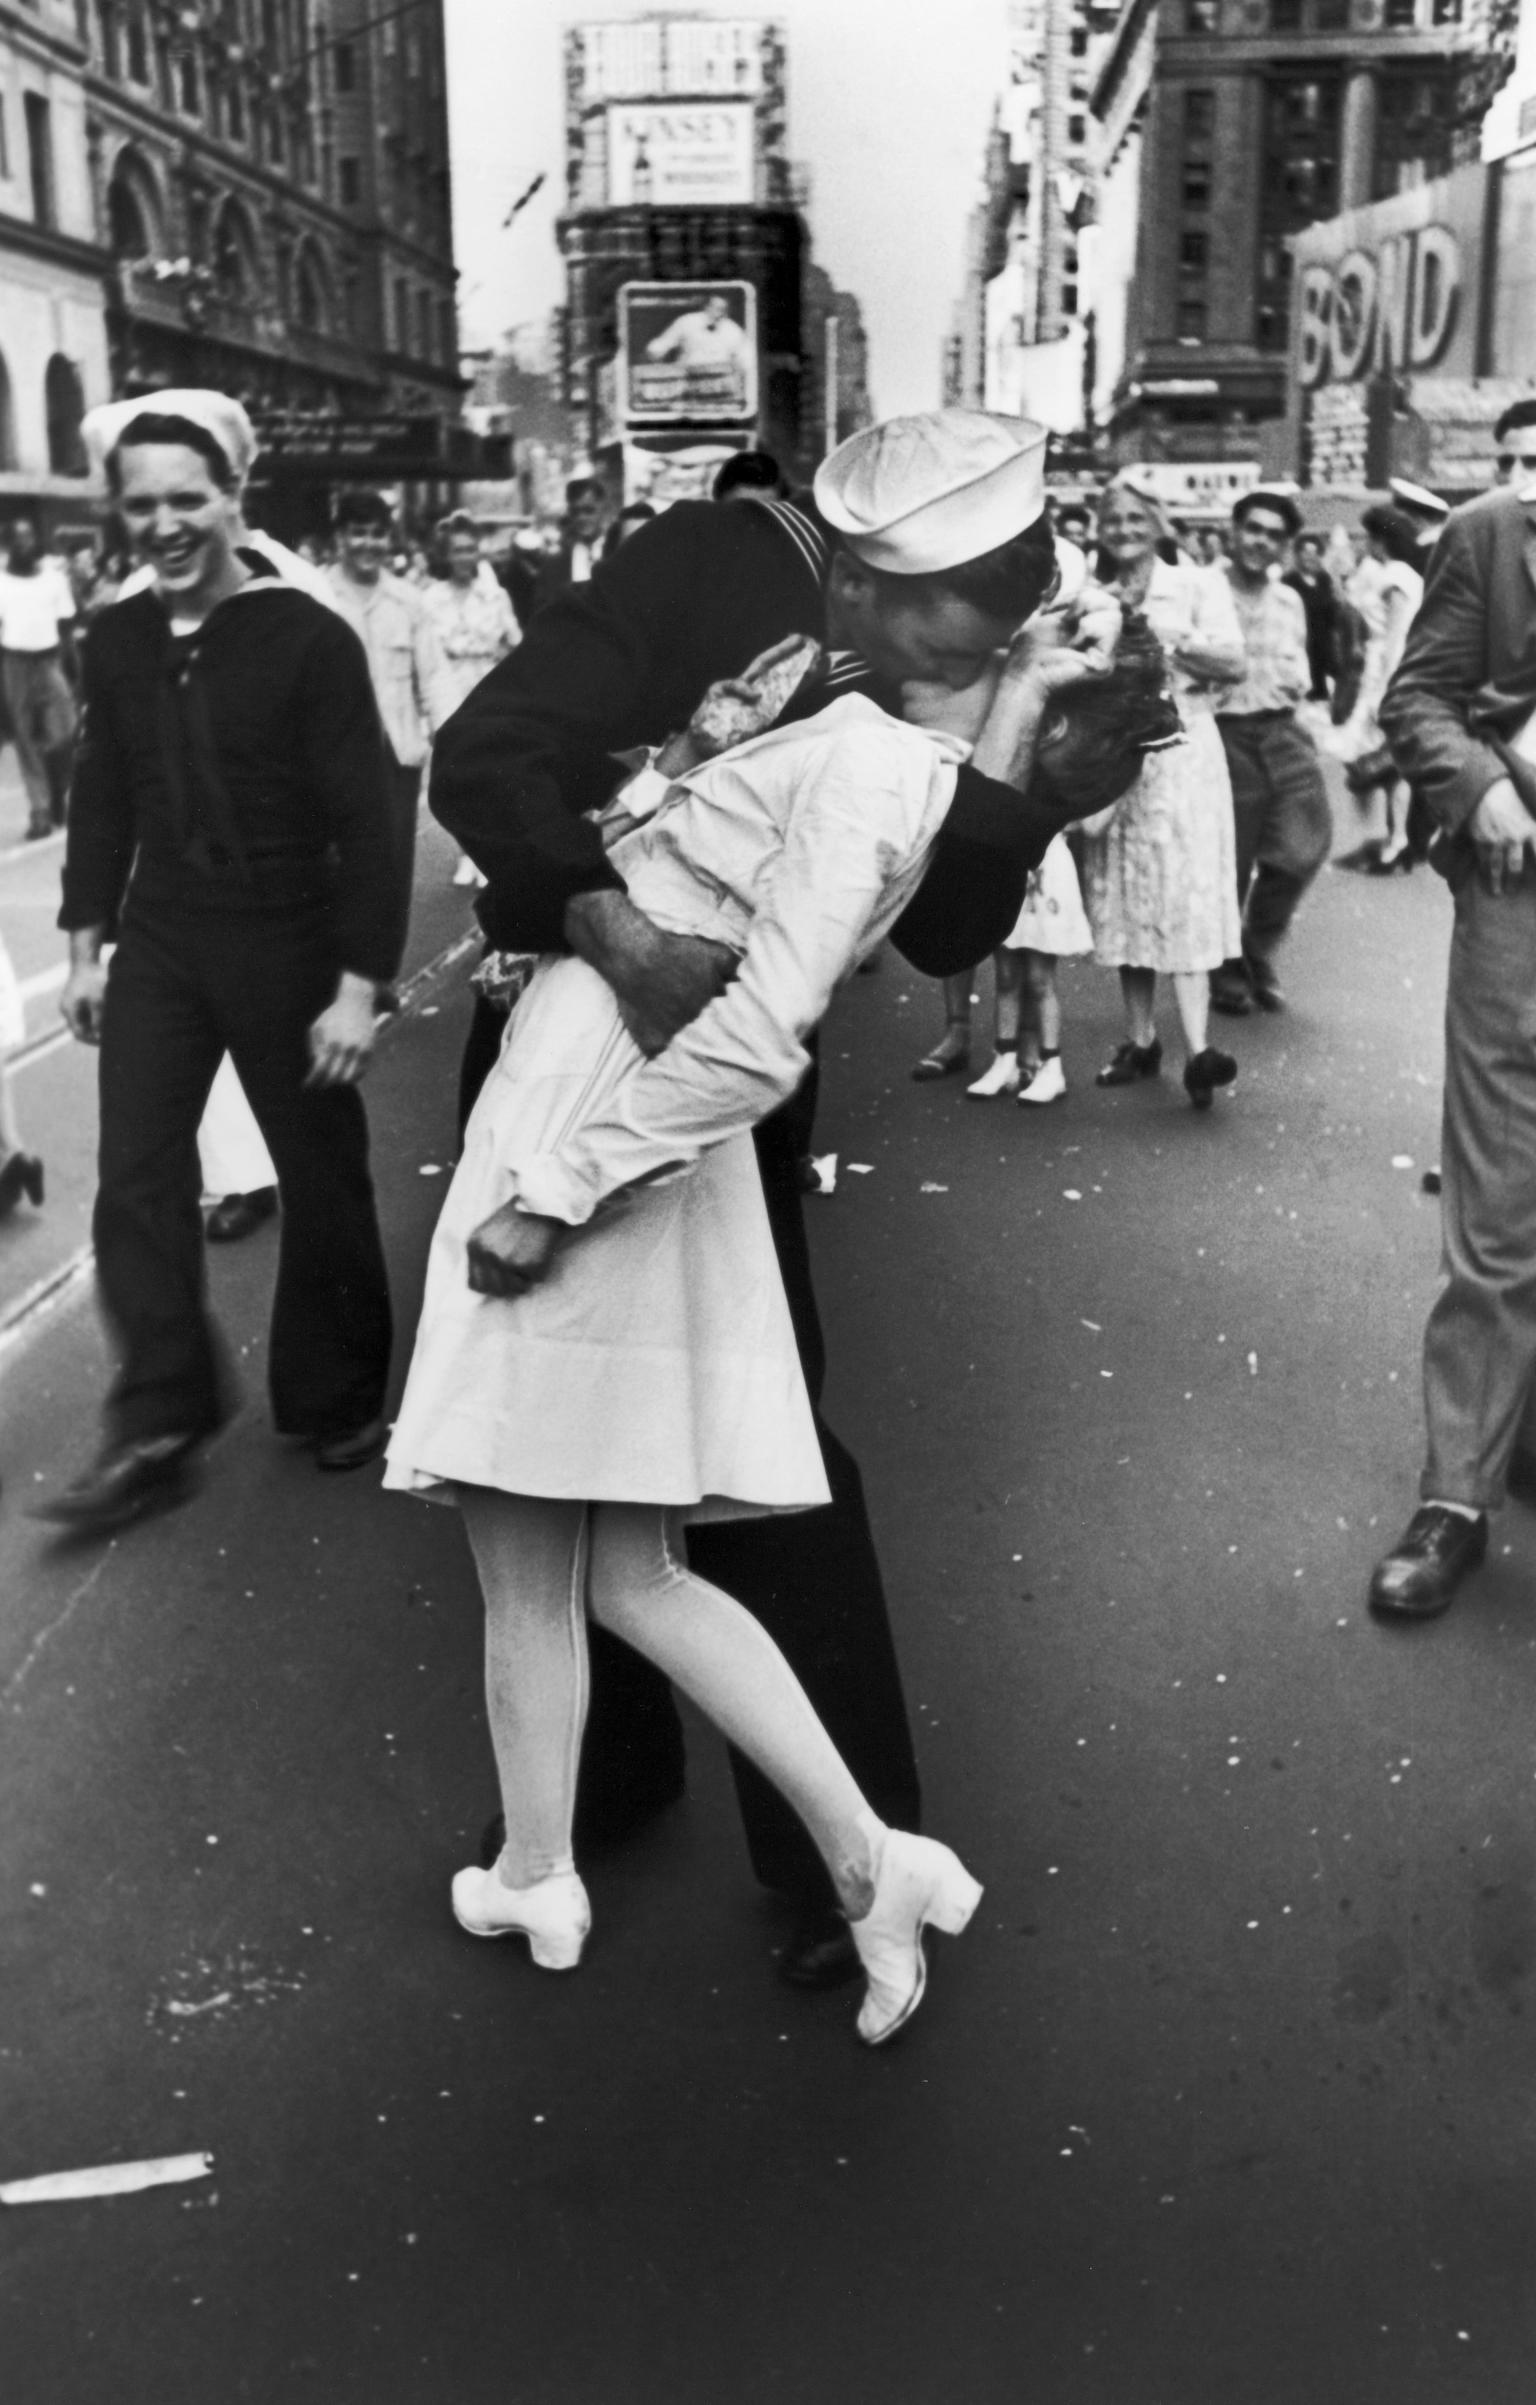 Photograph of sailor grabbing and kissing a woman in a busy city street with people and buildings in background. 